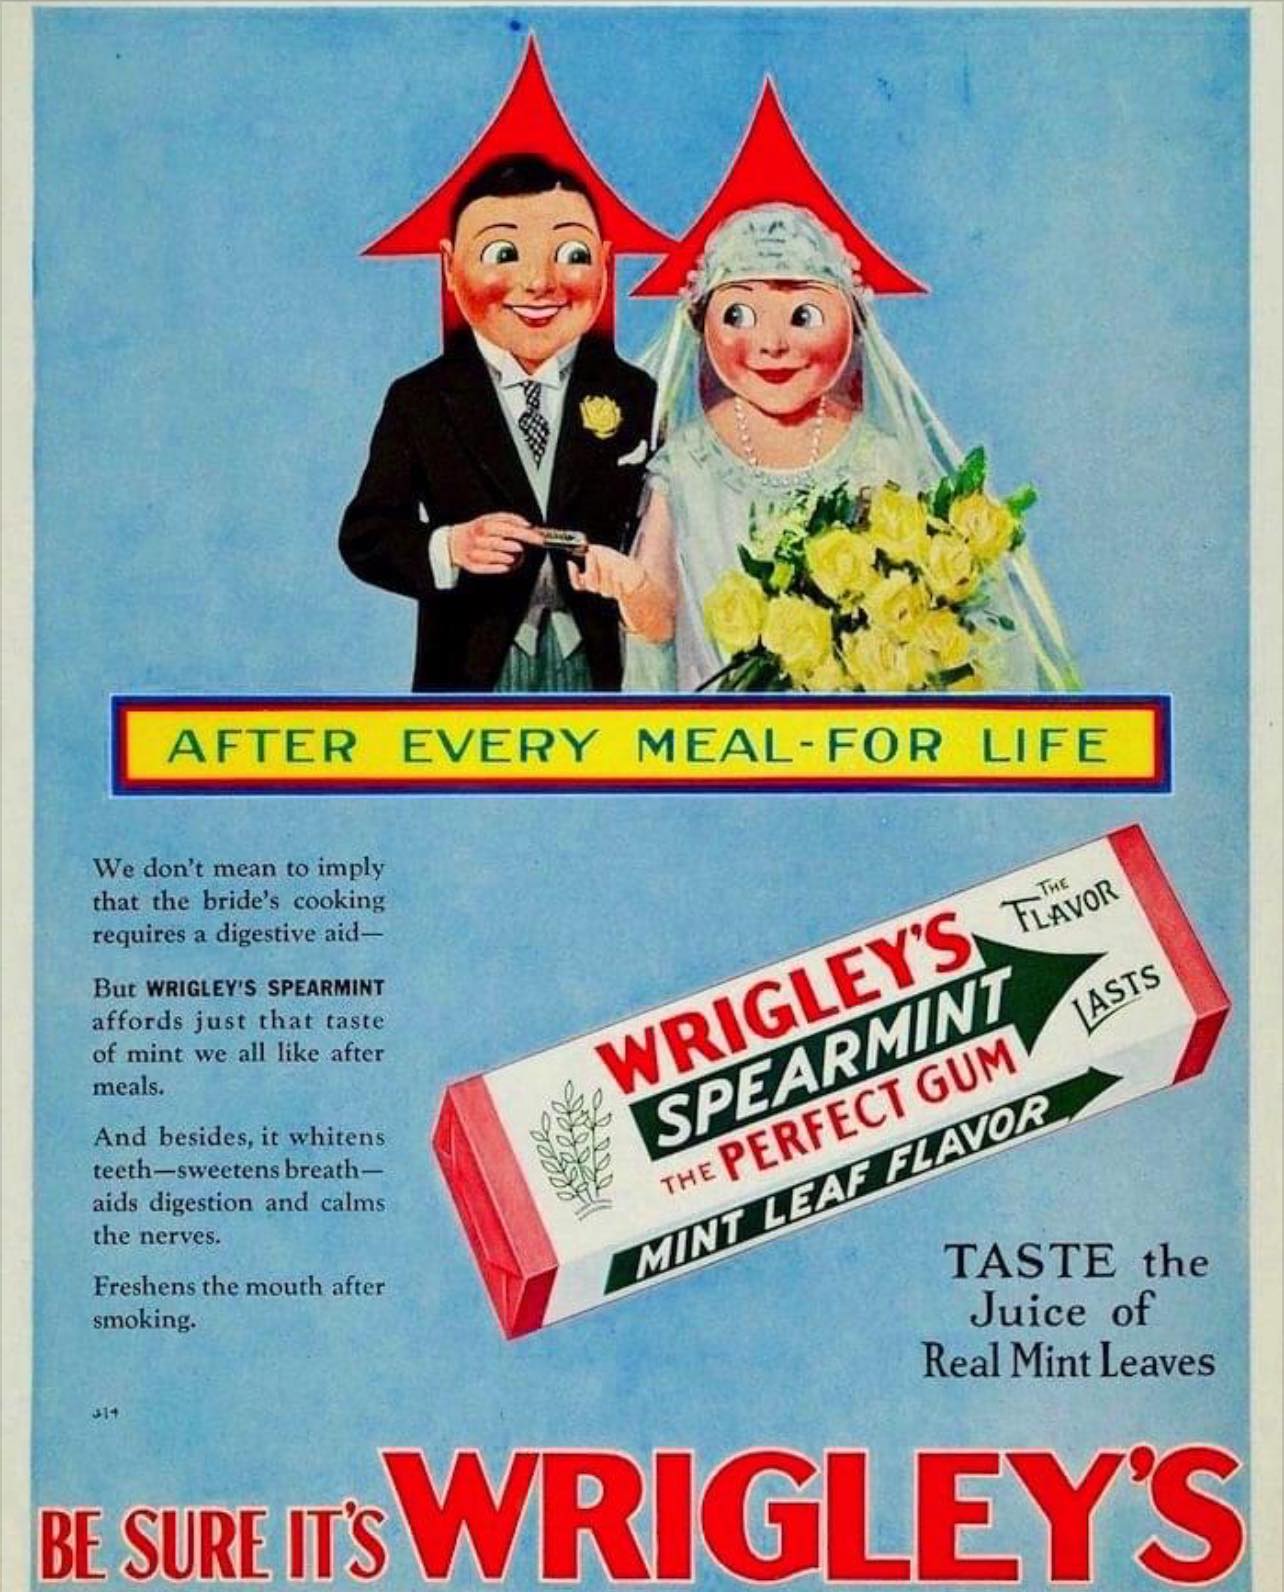 May be an image of 1 person, chewing bubblegum and text that says 'AFTER EVERY MEAL-FOR MEAL FOR LIFE We don't mean to imply that the bride's cooking requires digestive aid- But WRIGLEY'S SPEARMINT affords just that taste of mint we all like after meals. And besides, it whitens teeth-sweetensbrea breath- aids digestion and calms the nerves. Freshens the mouth after smoking. WRIGLEY'S SPEARMINT FLAVOR FLAVOR LASTS GUM THE PERFECT LEAF MINT MINT J14 TASTE the Juice of Real Mint Leaves BE SURE IT'S WRIGLEY'S'